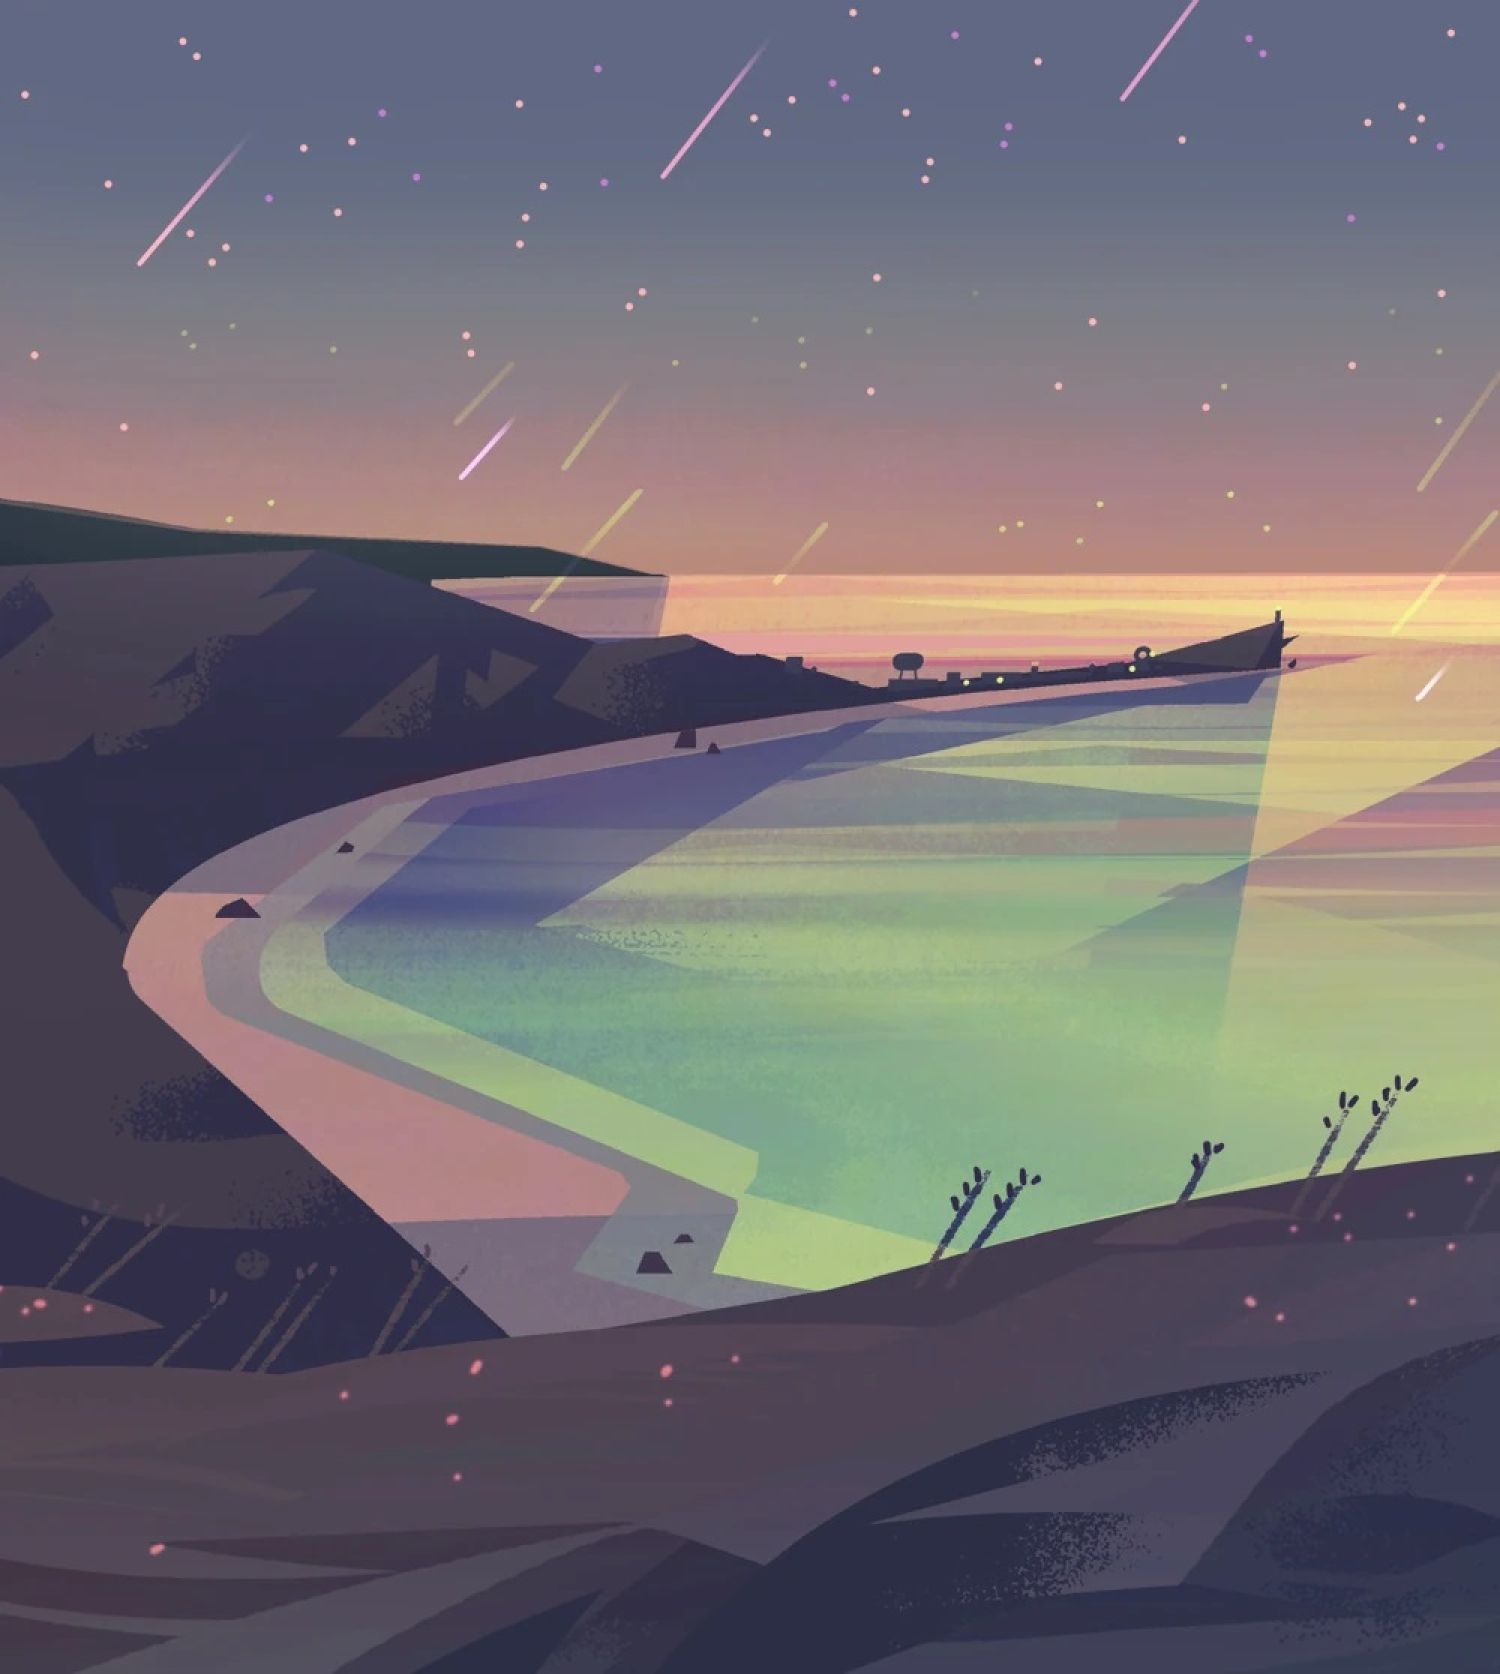 CalArts-style illustration of a beach and hill at dusk